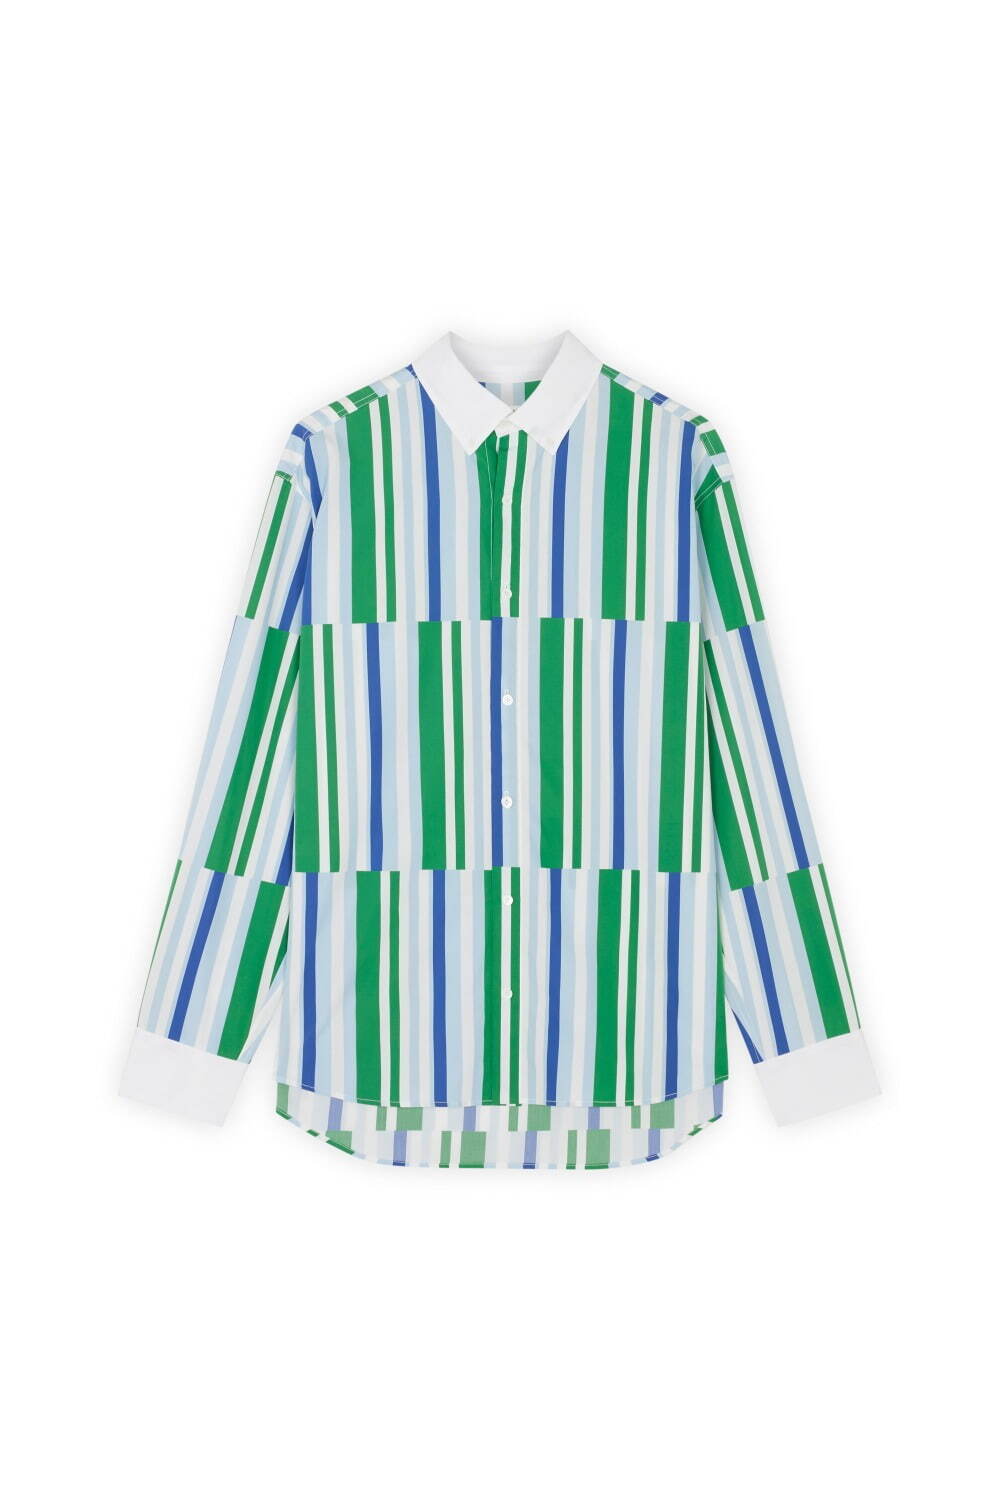 RELAXED STAGGERED STRIPES SHIRT 45,000円